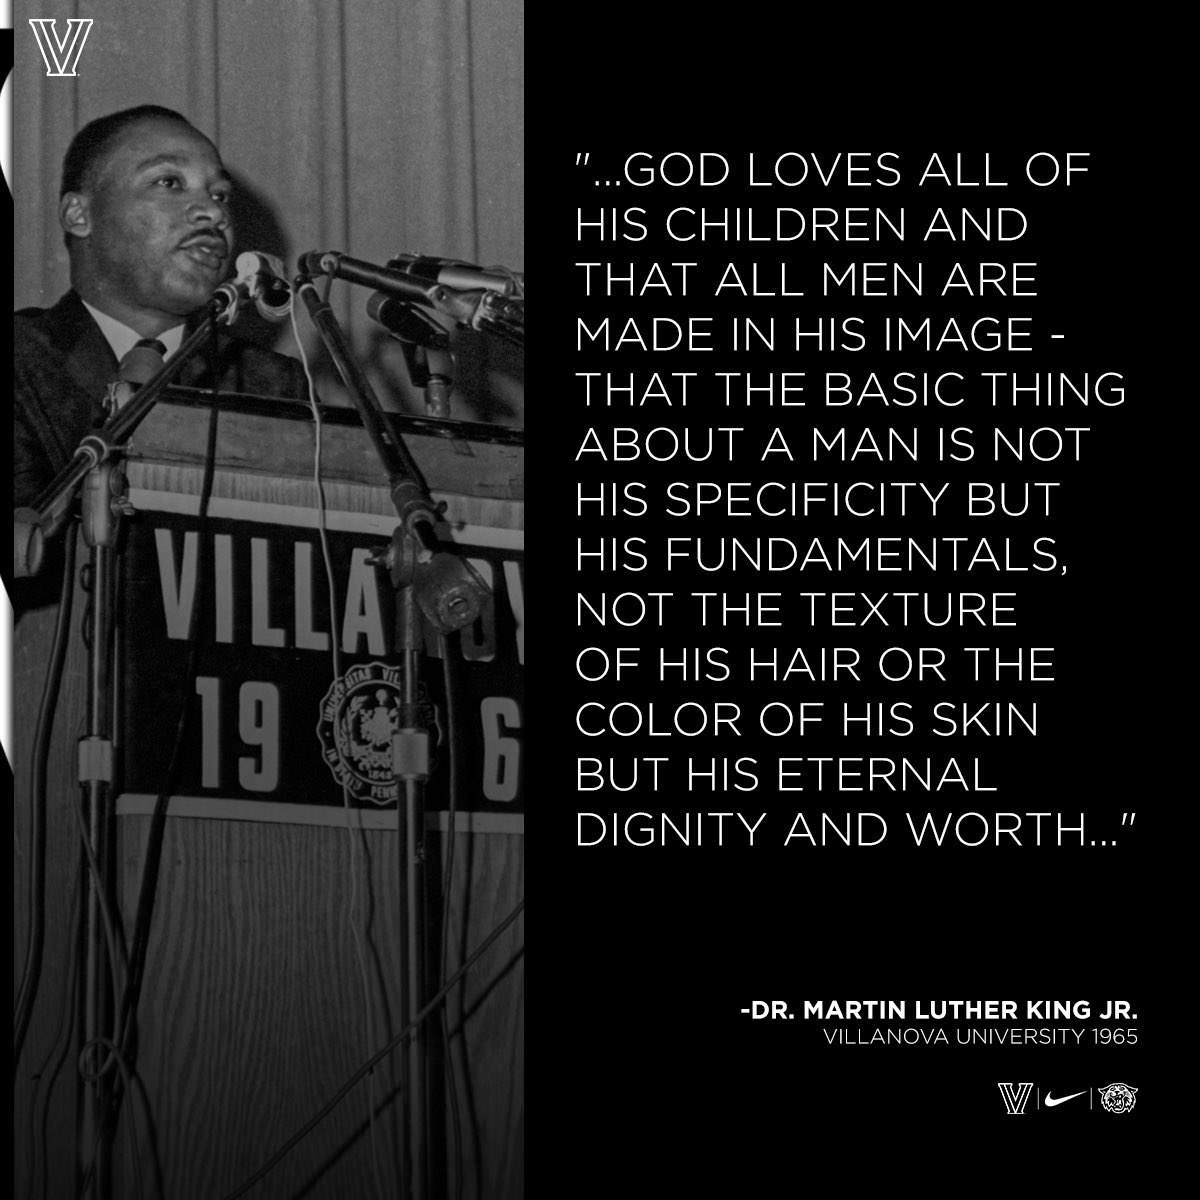 Today we remember and honor the life and legacy of Dr. Martin Luther King Jr. #MLKDay